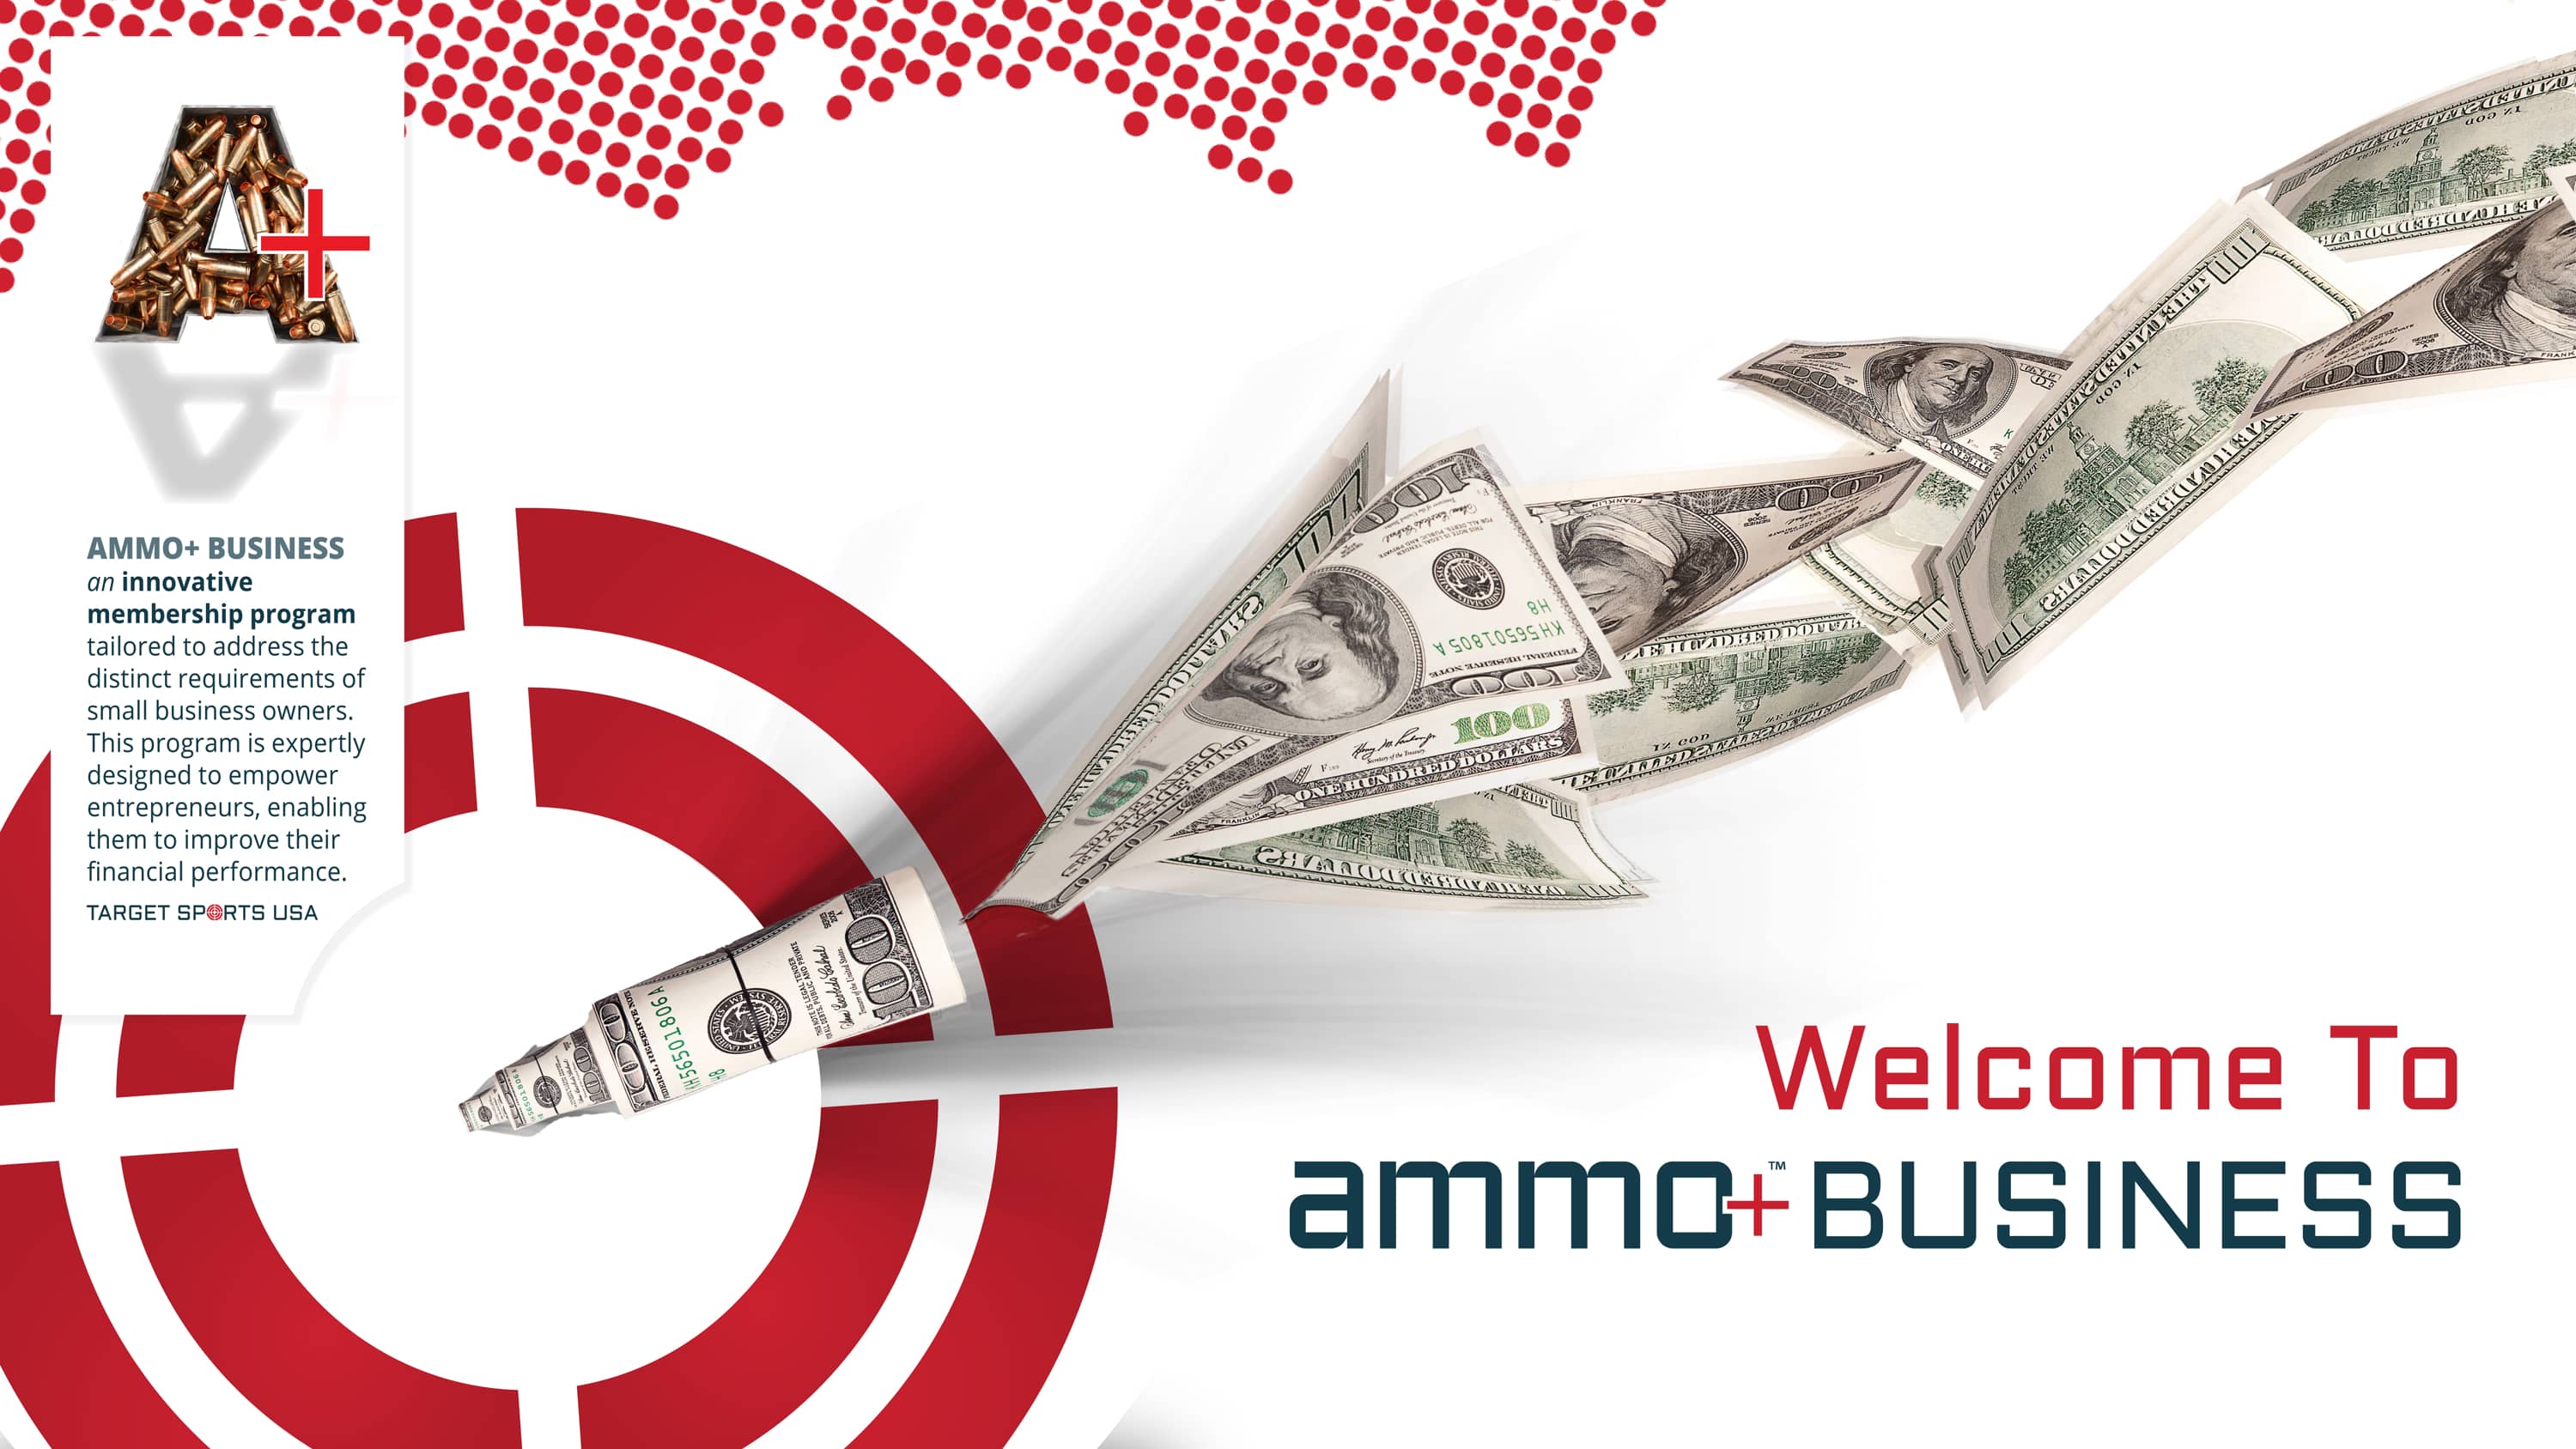 Welcome To Ammo Plus Business - an innovative membership program tailored to address the distinct requirements of small business owners. This program is expertly designed to empower entrepreneurs, enabling them to improve their financial performance. Target Sports USA